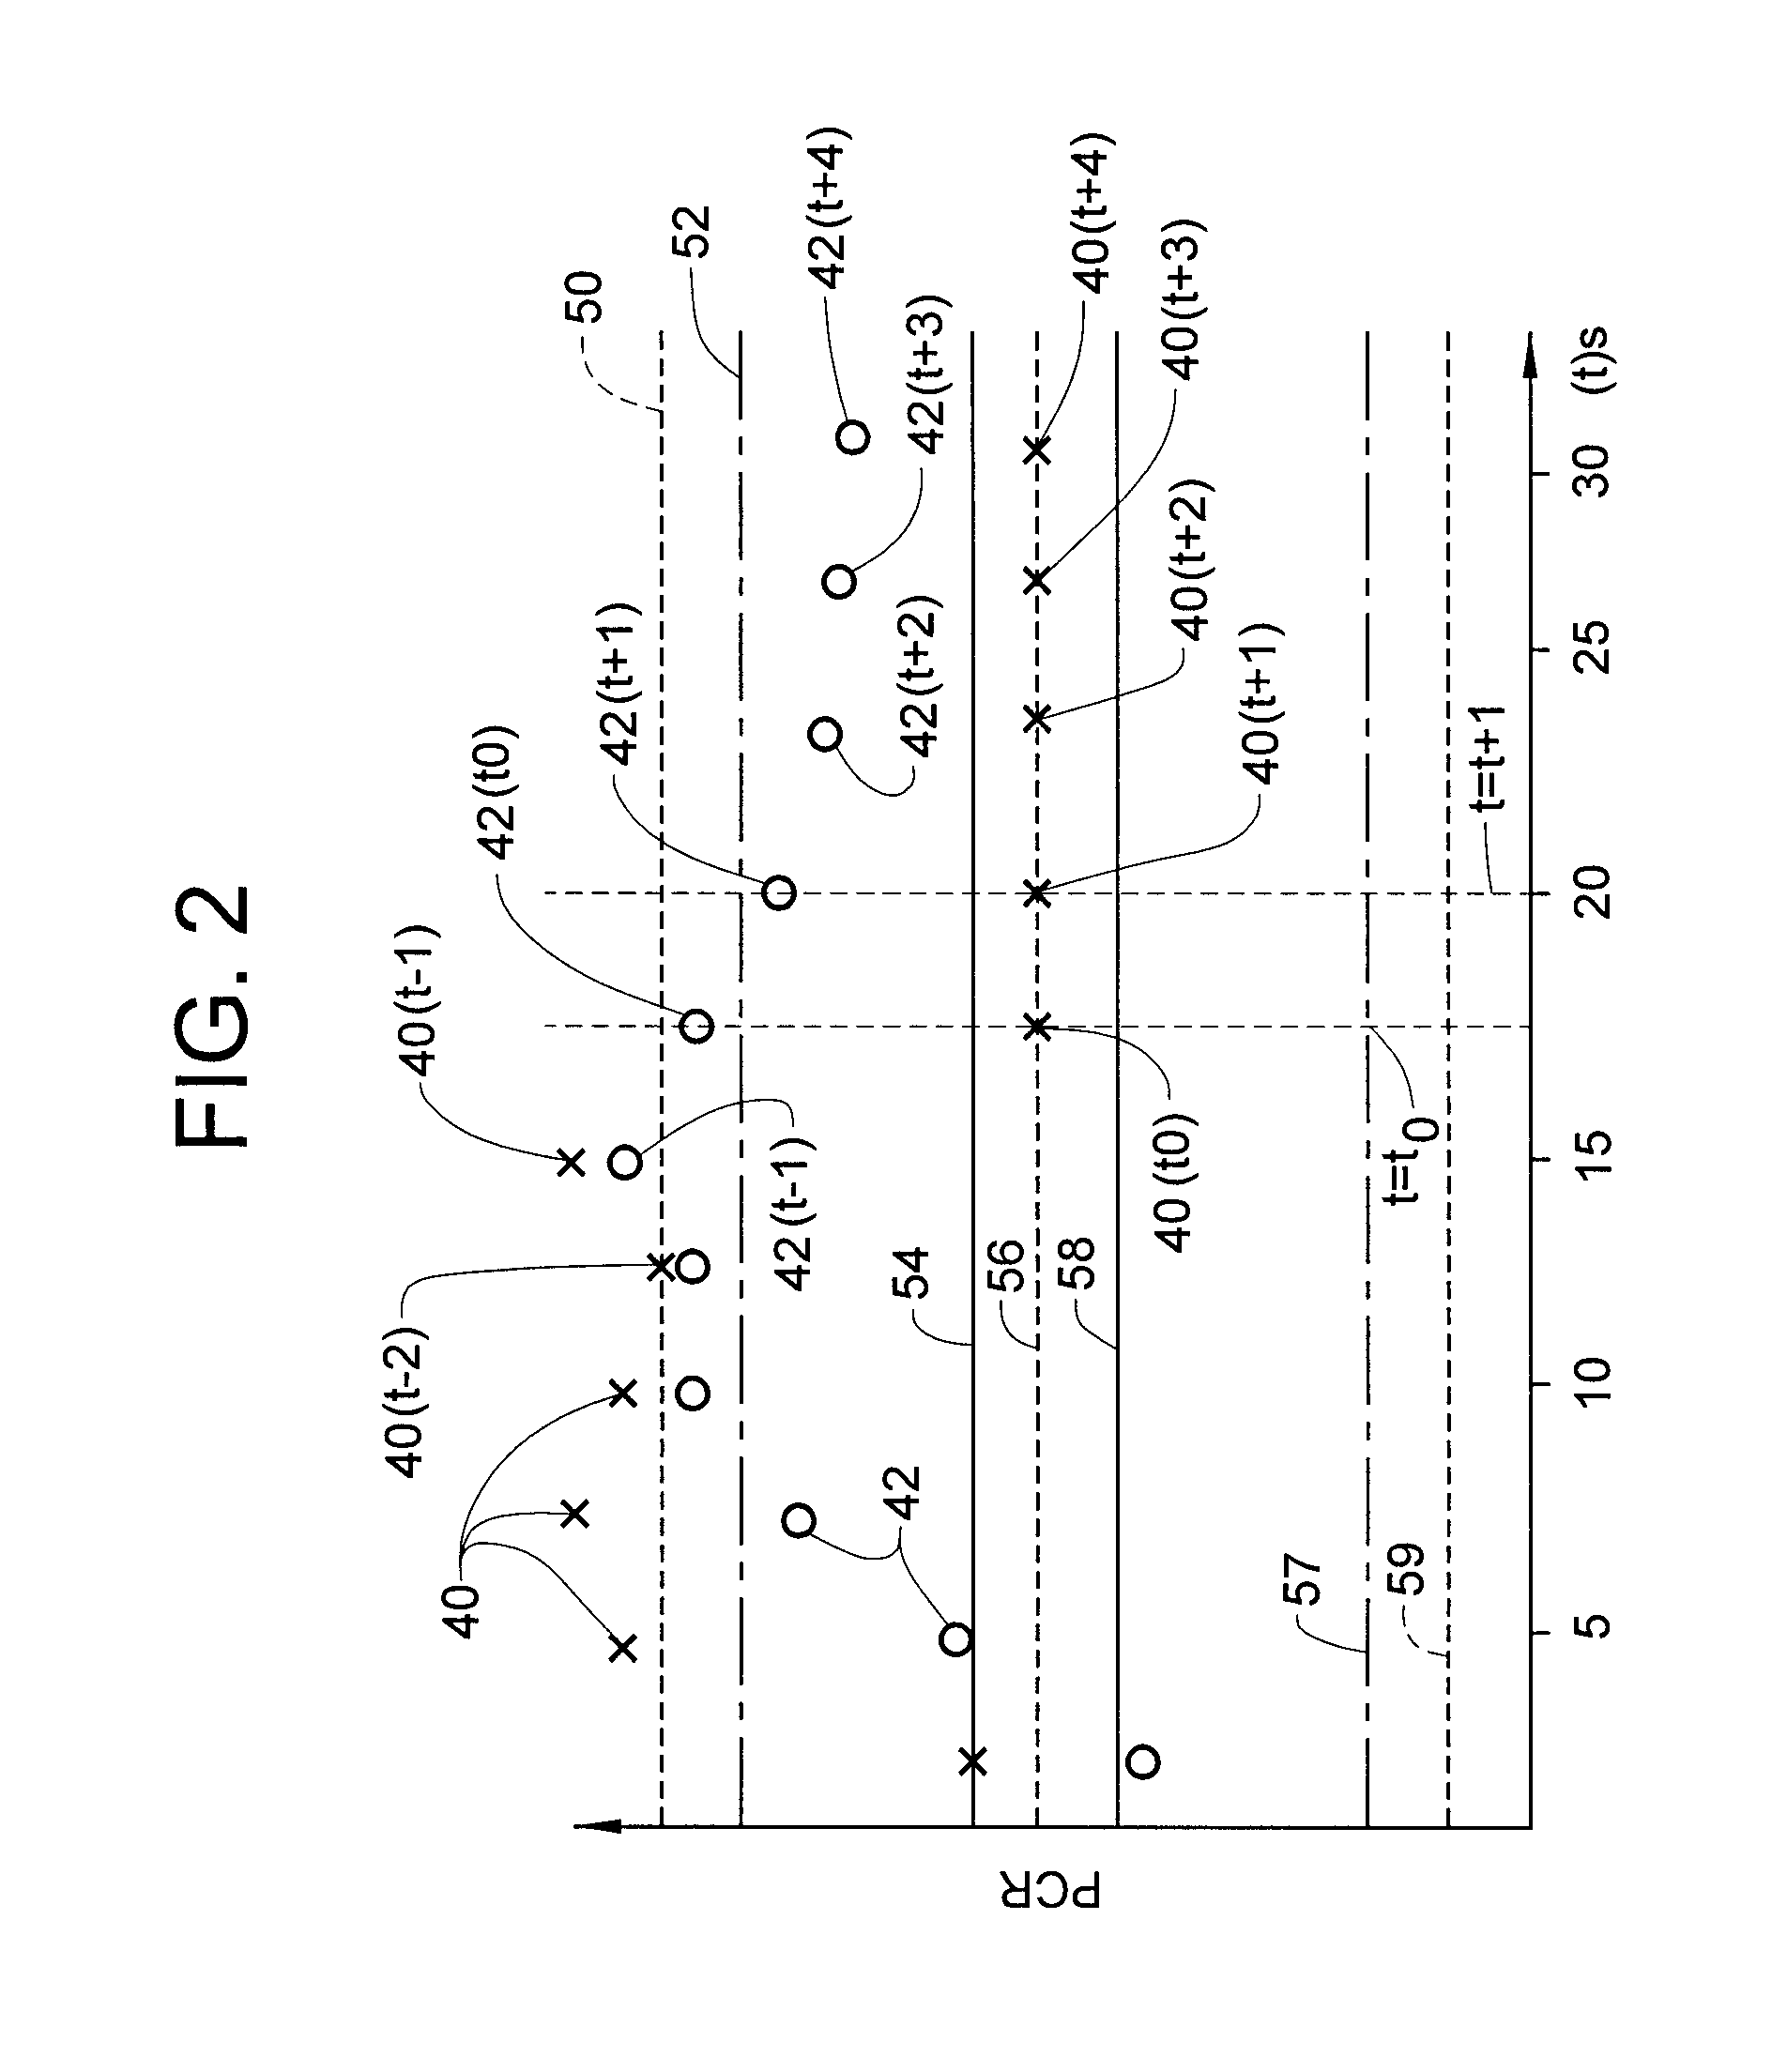 Exponentially weighted moving averaging filter with adjustable weighting factor